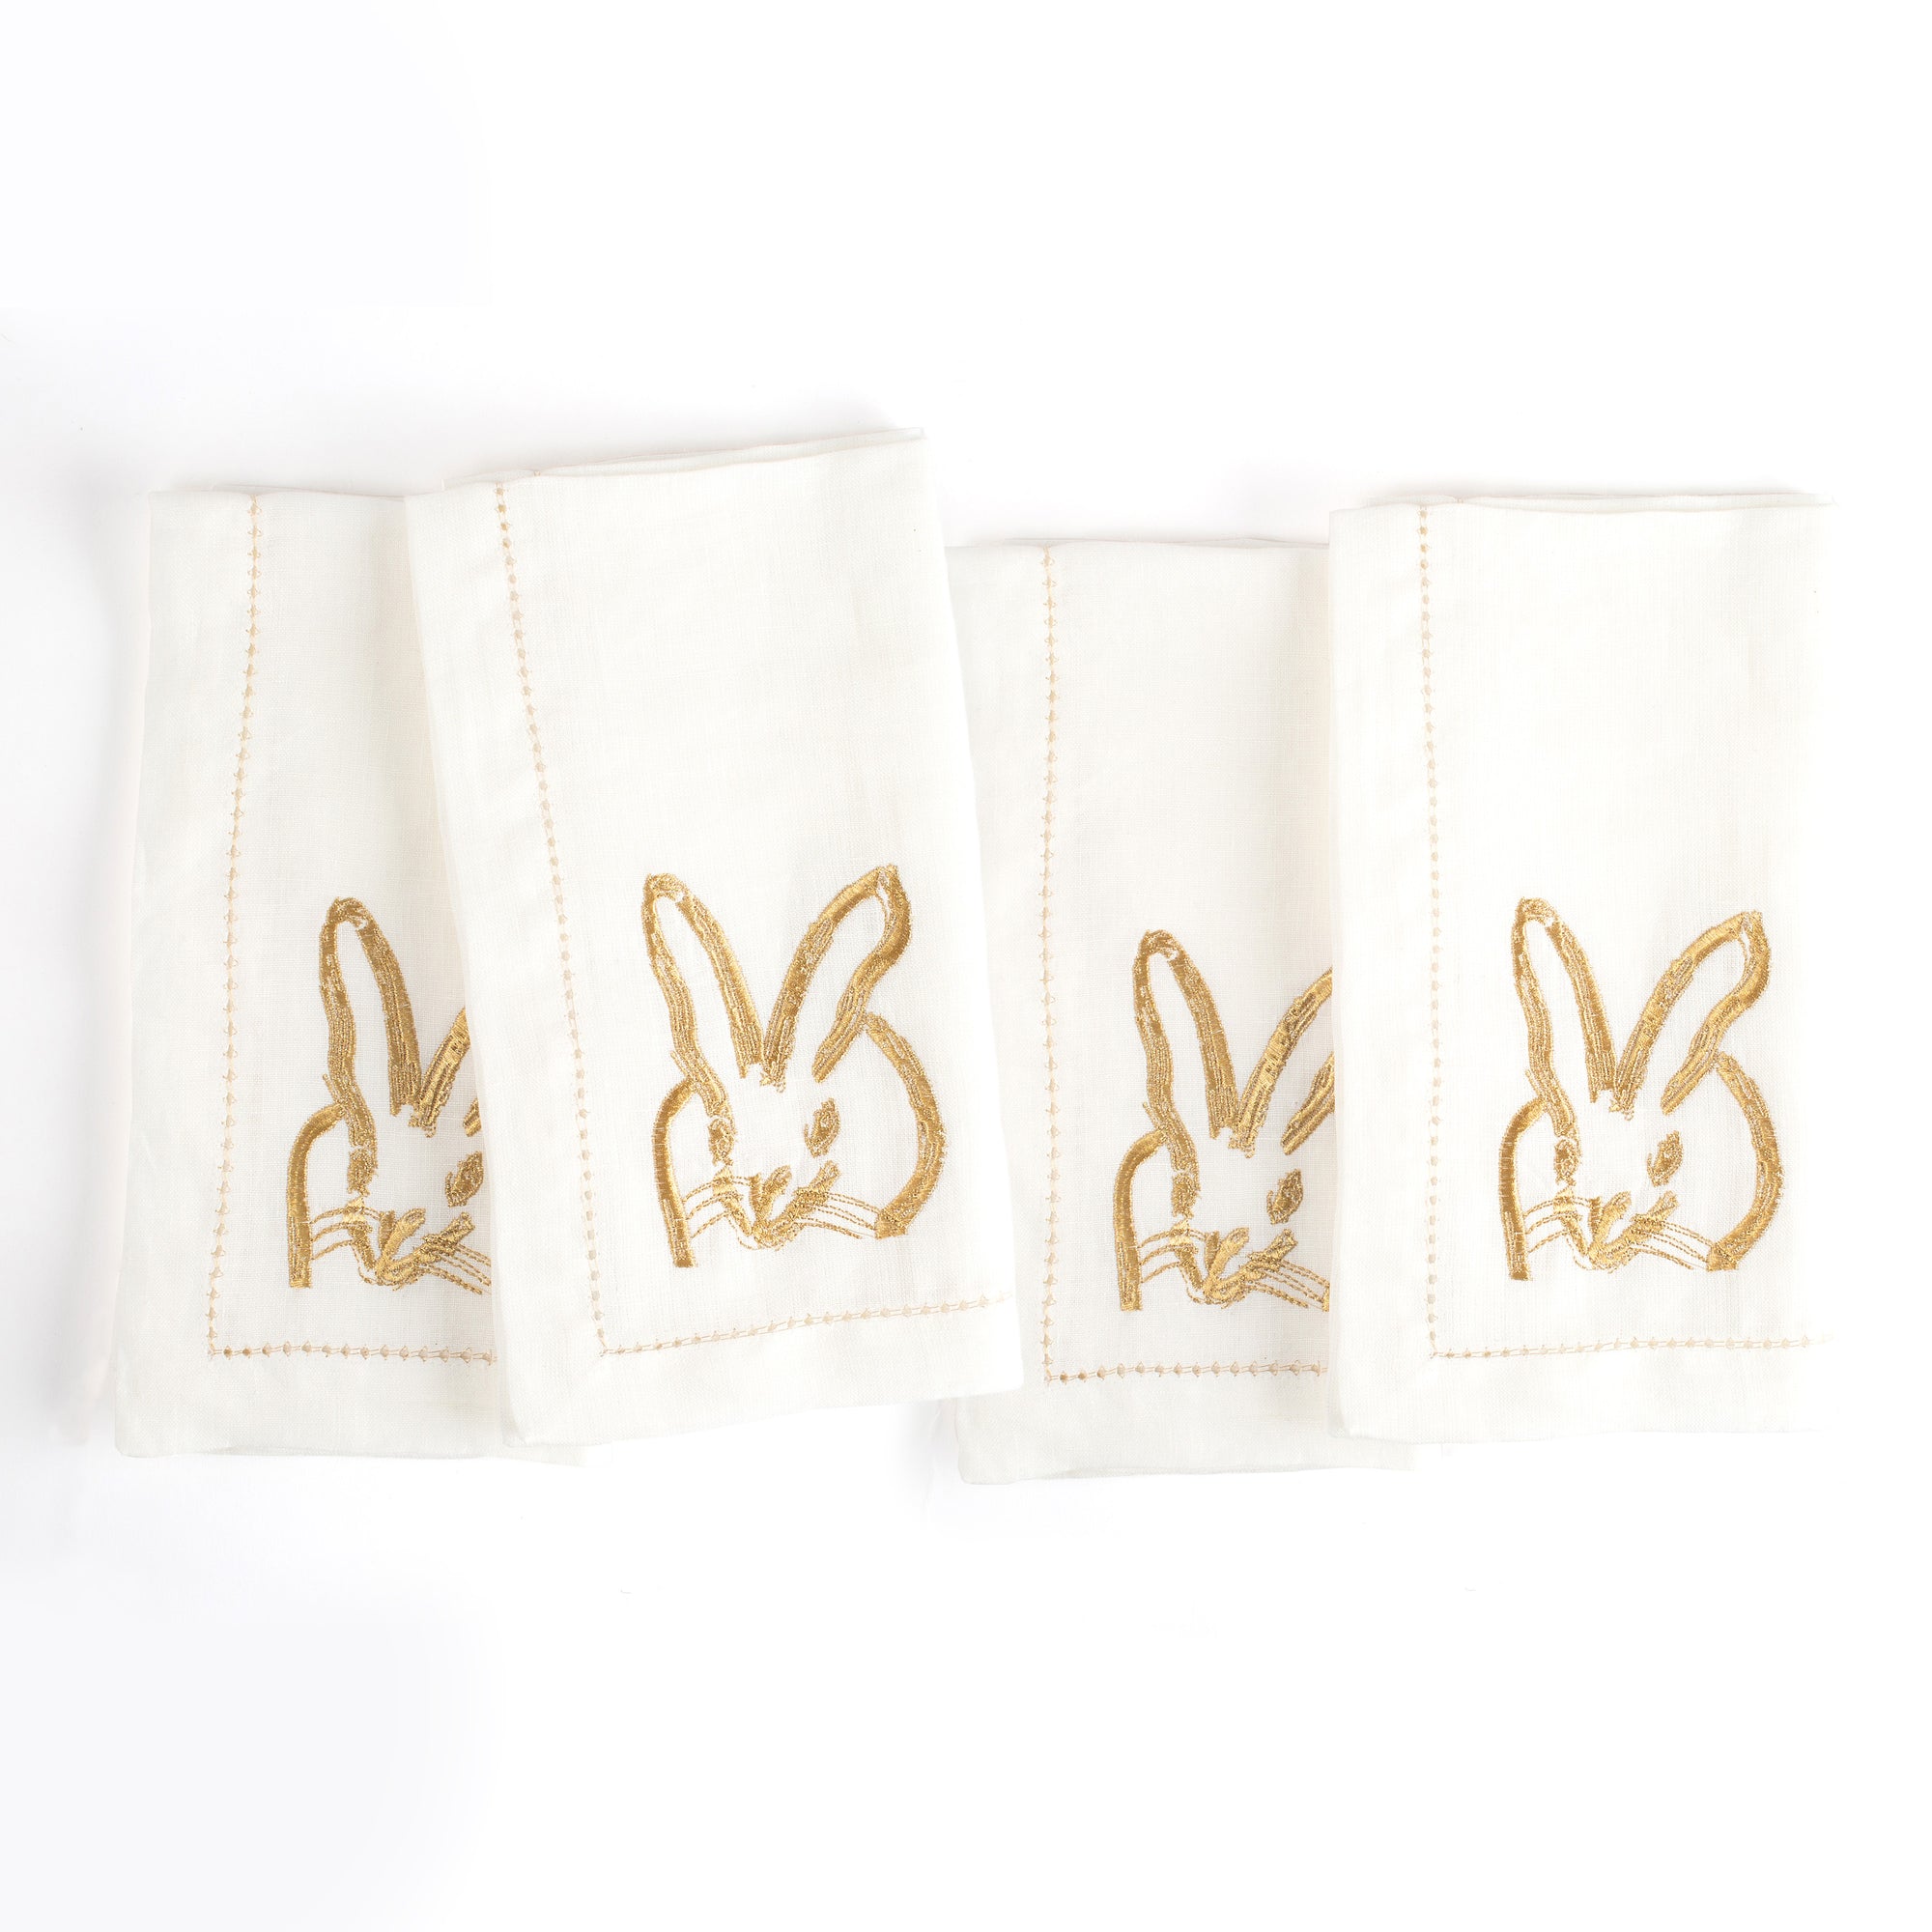 Painted Bunny Embroidered Linen Dinner Napkin, White with Gold